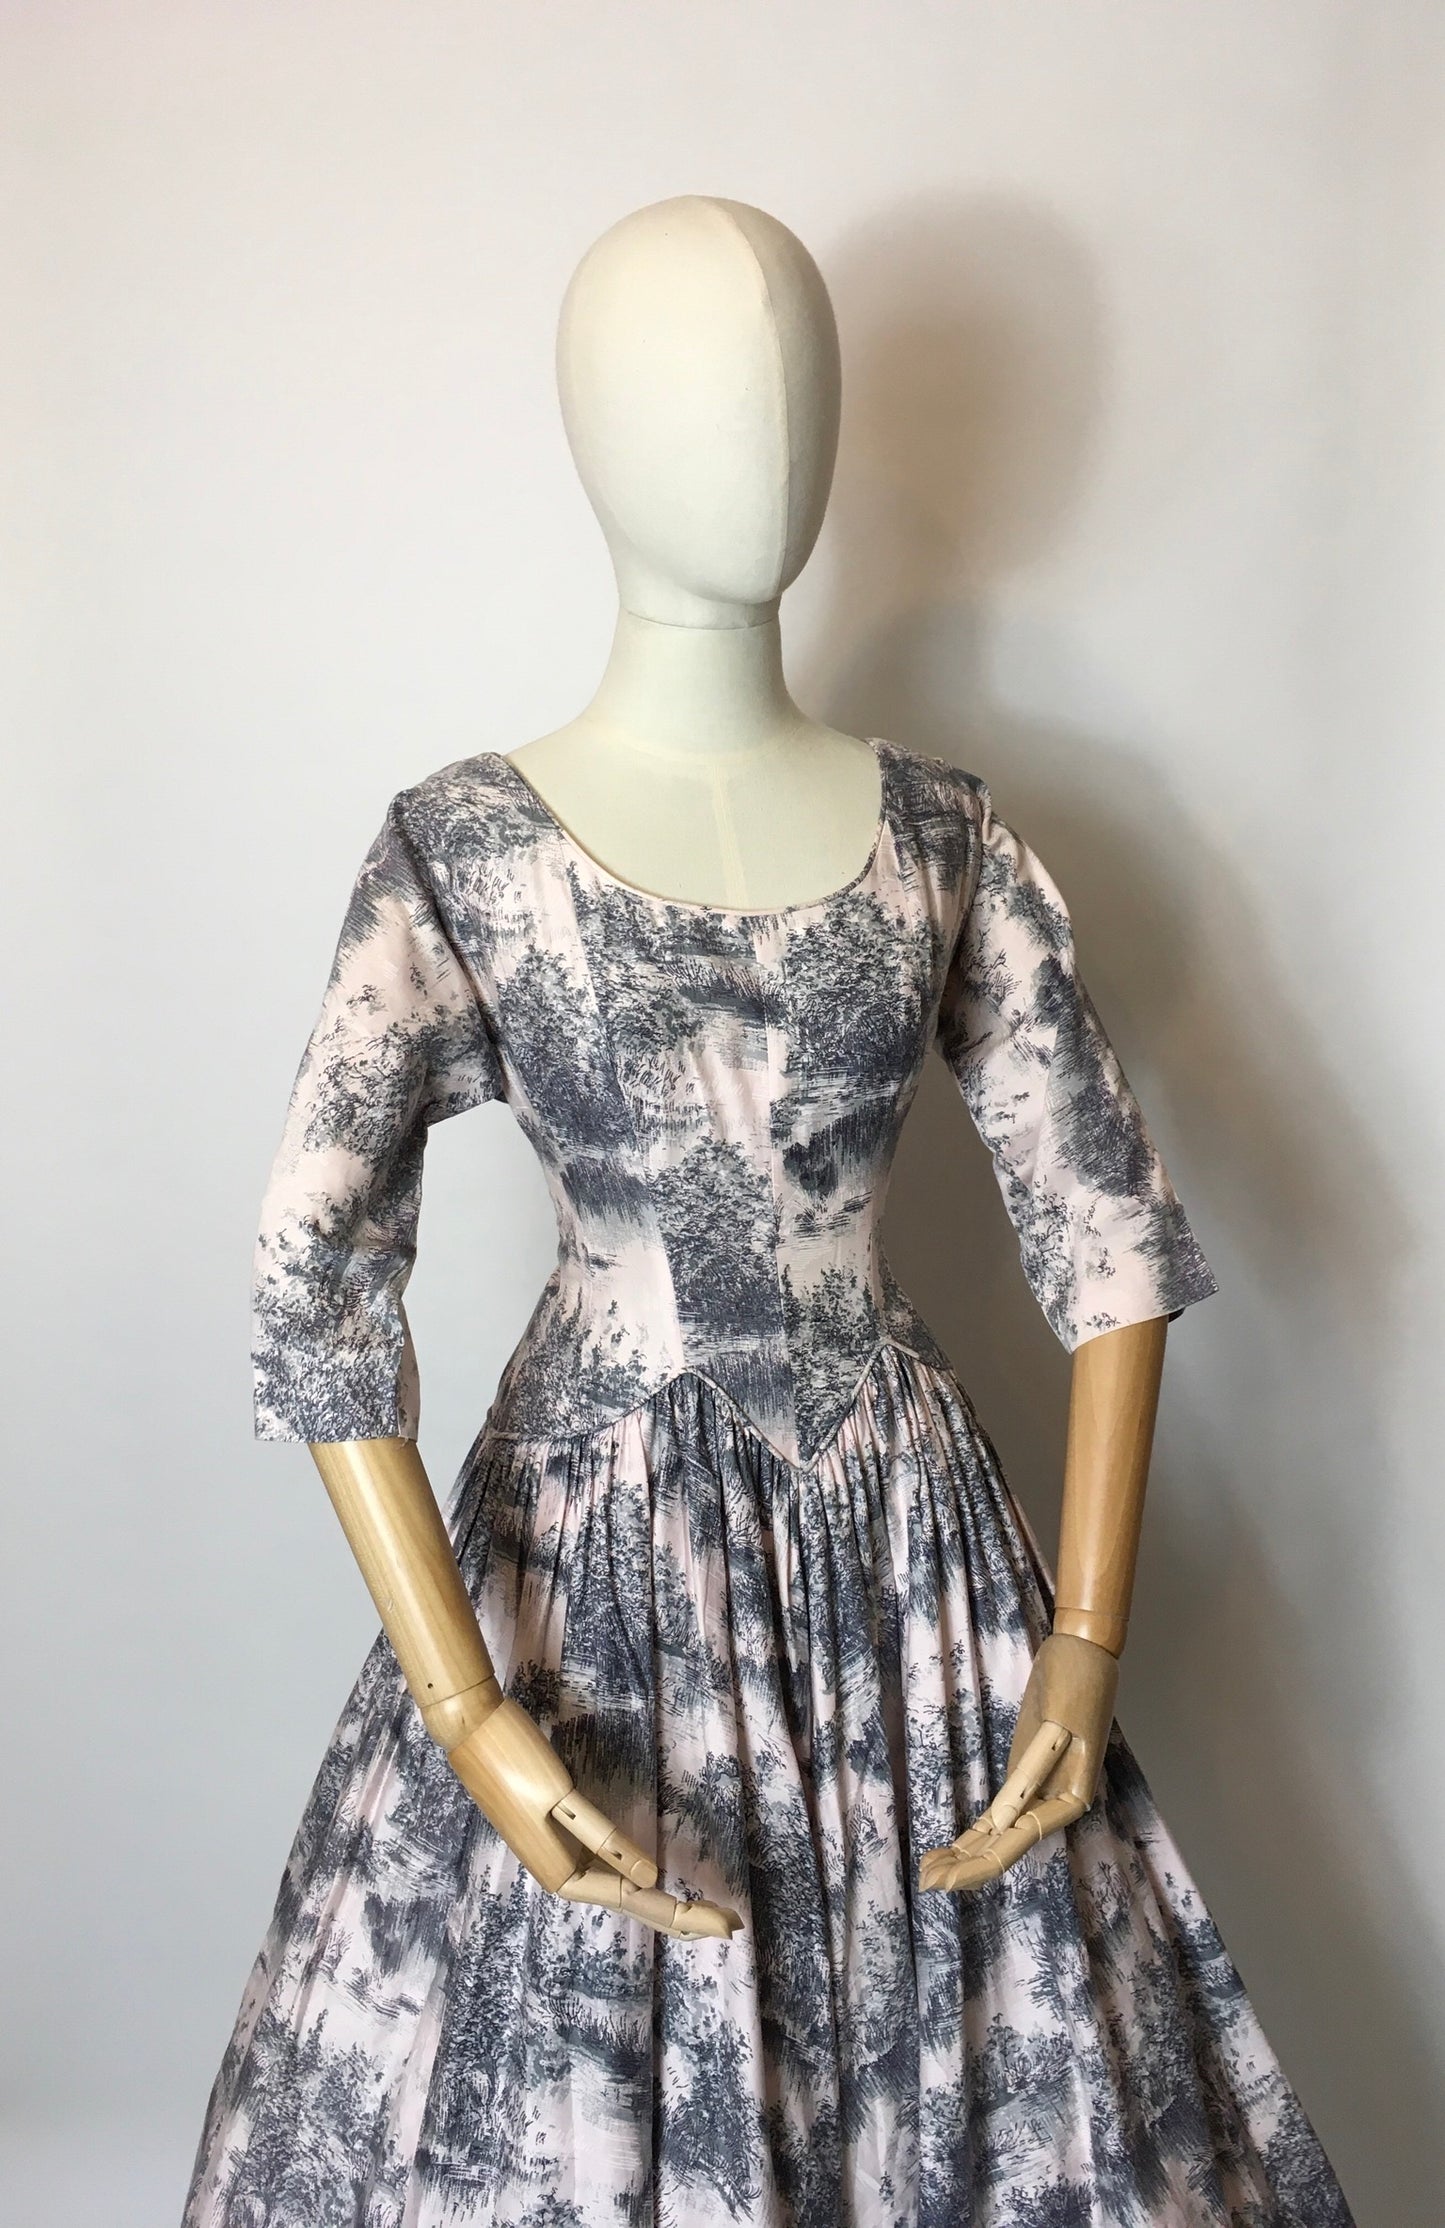 Original 1950s Darling Dress - In the Most Delicate Powder Pink with Charcoal Stencil Overlay Print